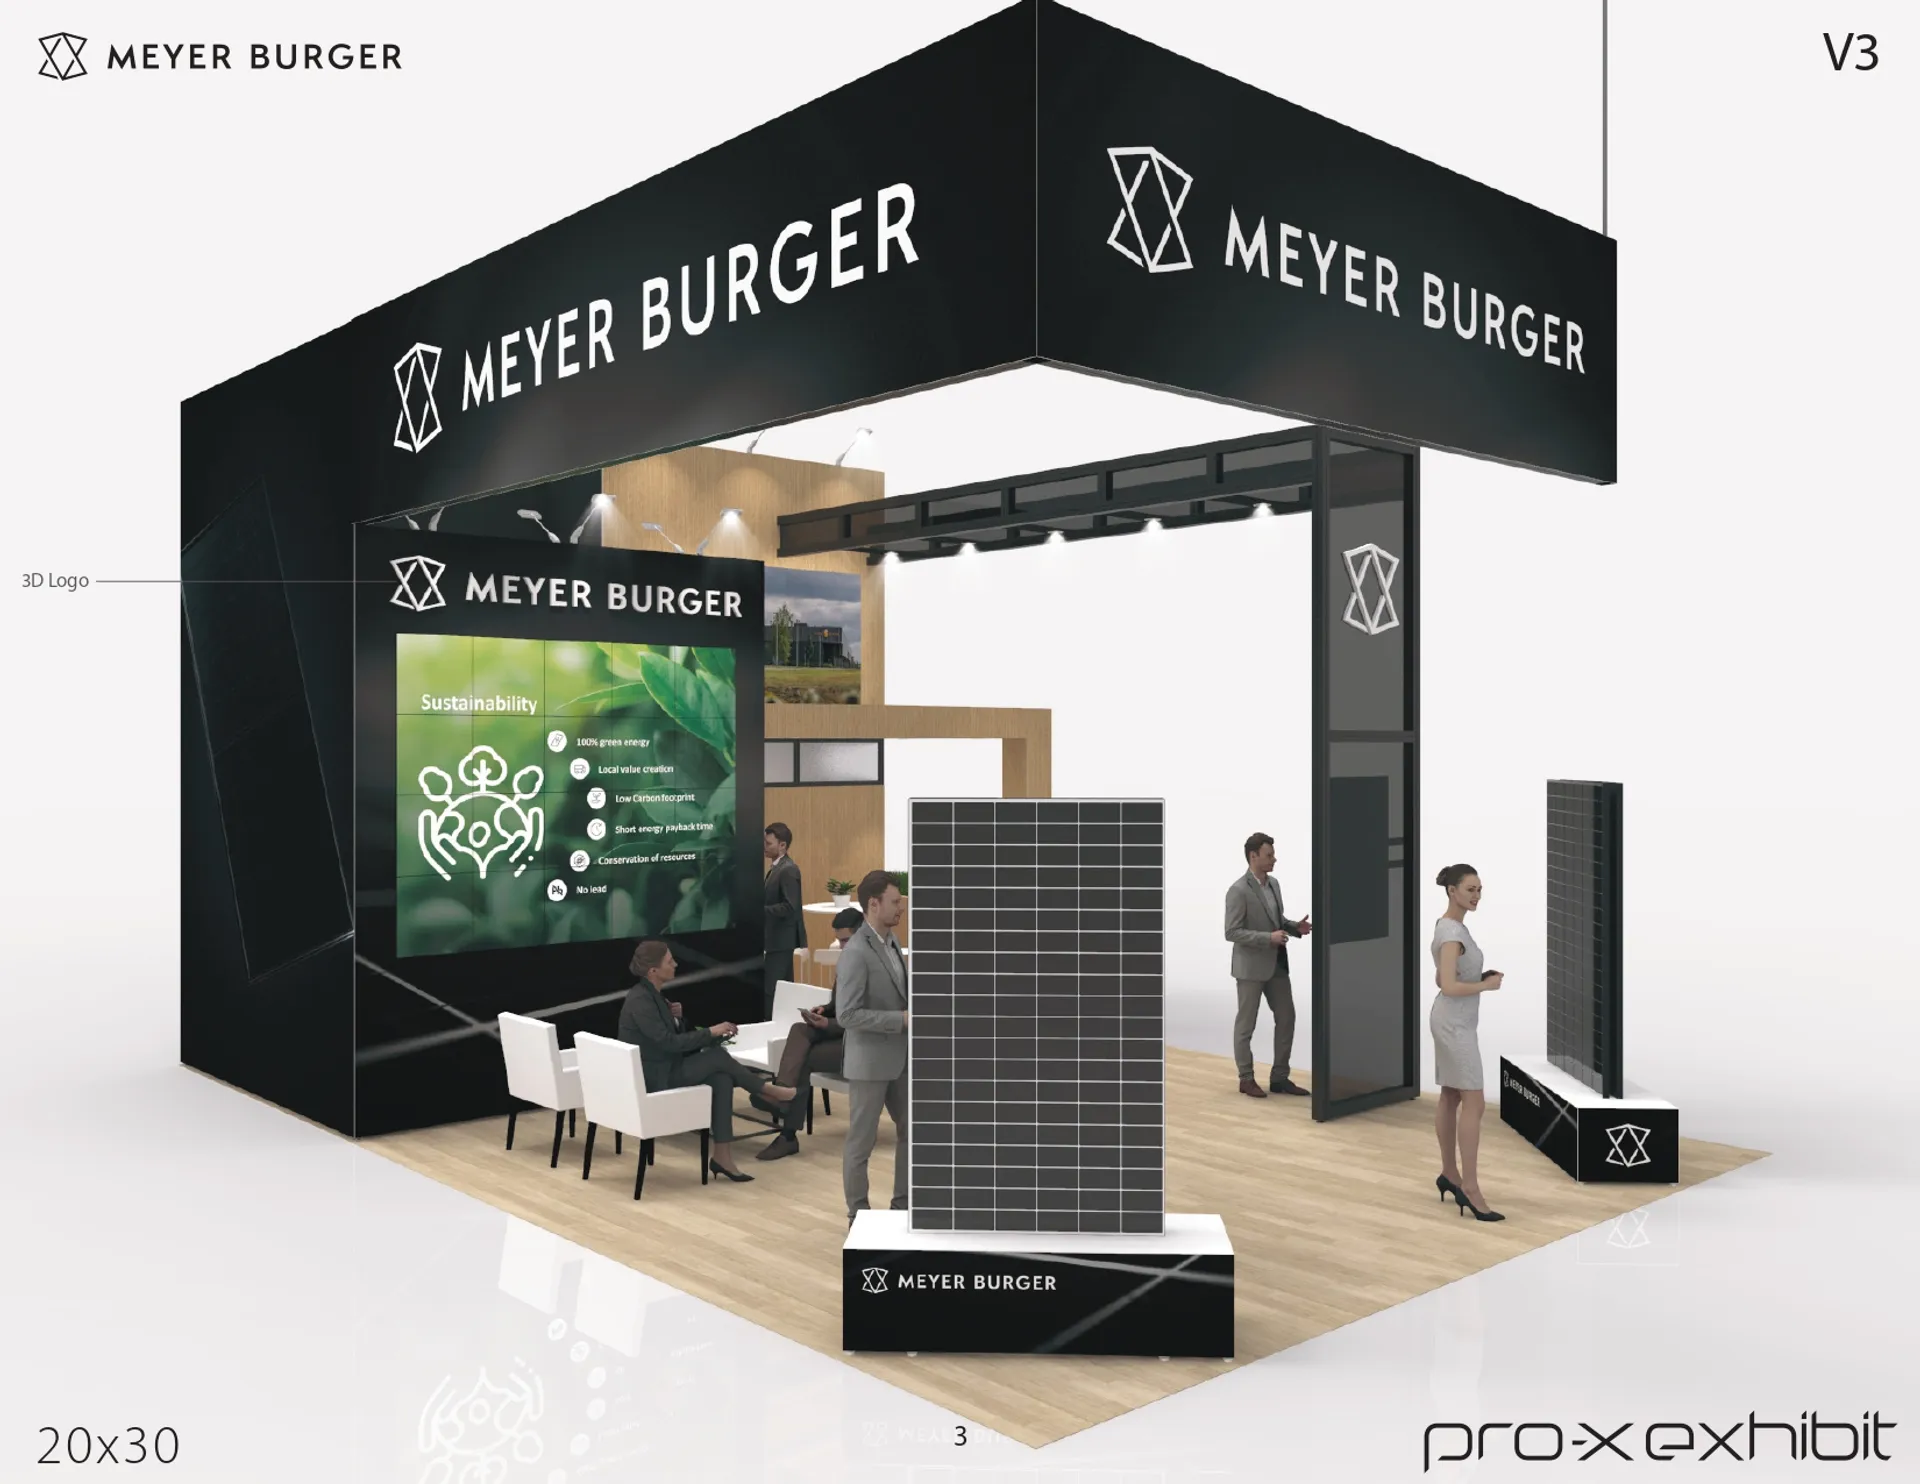 booth-design-projects/Pro-X Exhibits/2024-04-11-20x30-PENINSULA-Project-57/Meyer Burger - 20x30 - Intersolar 2023 - Pro-X Exhibit - V3 (1)-3_page-0001-pmxb0l.jpg